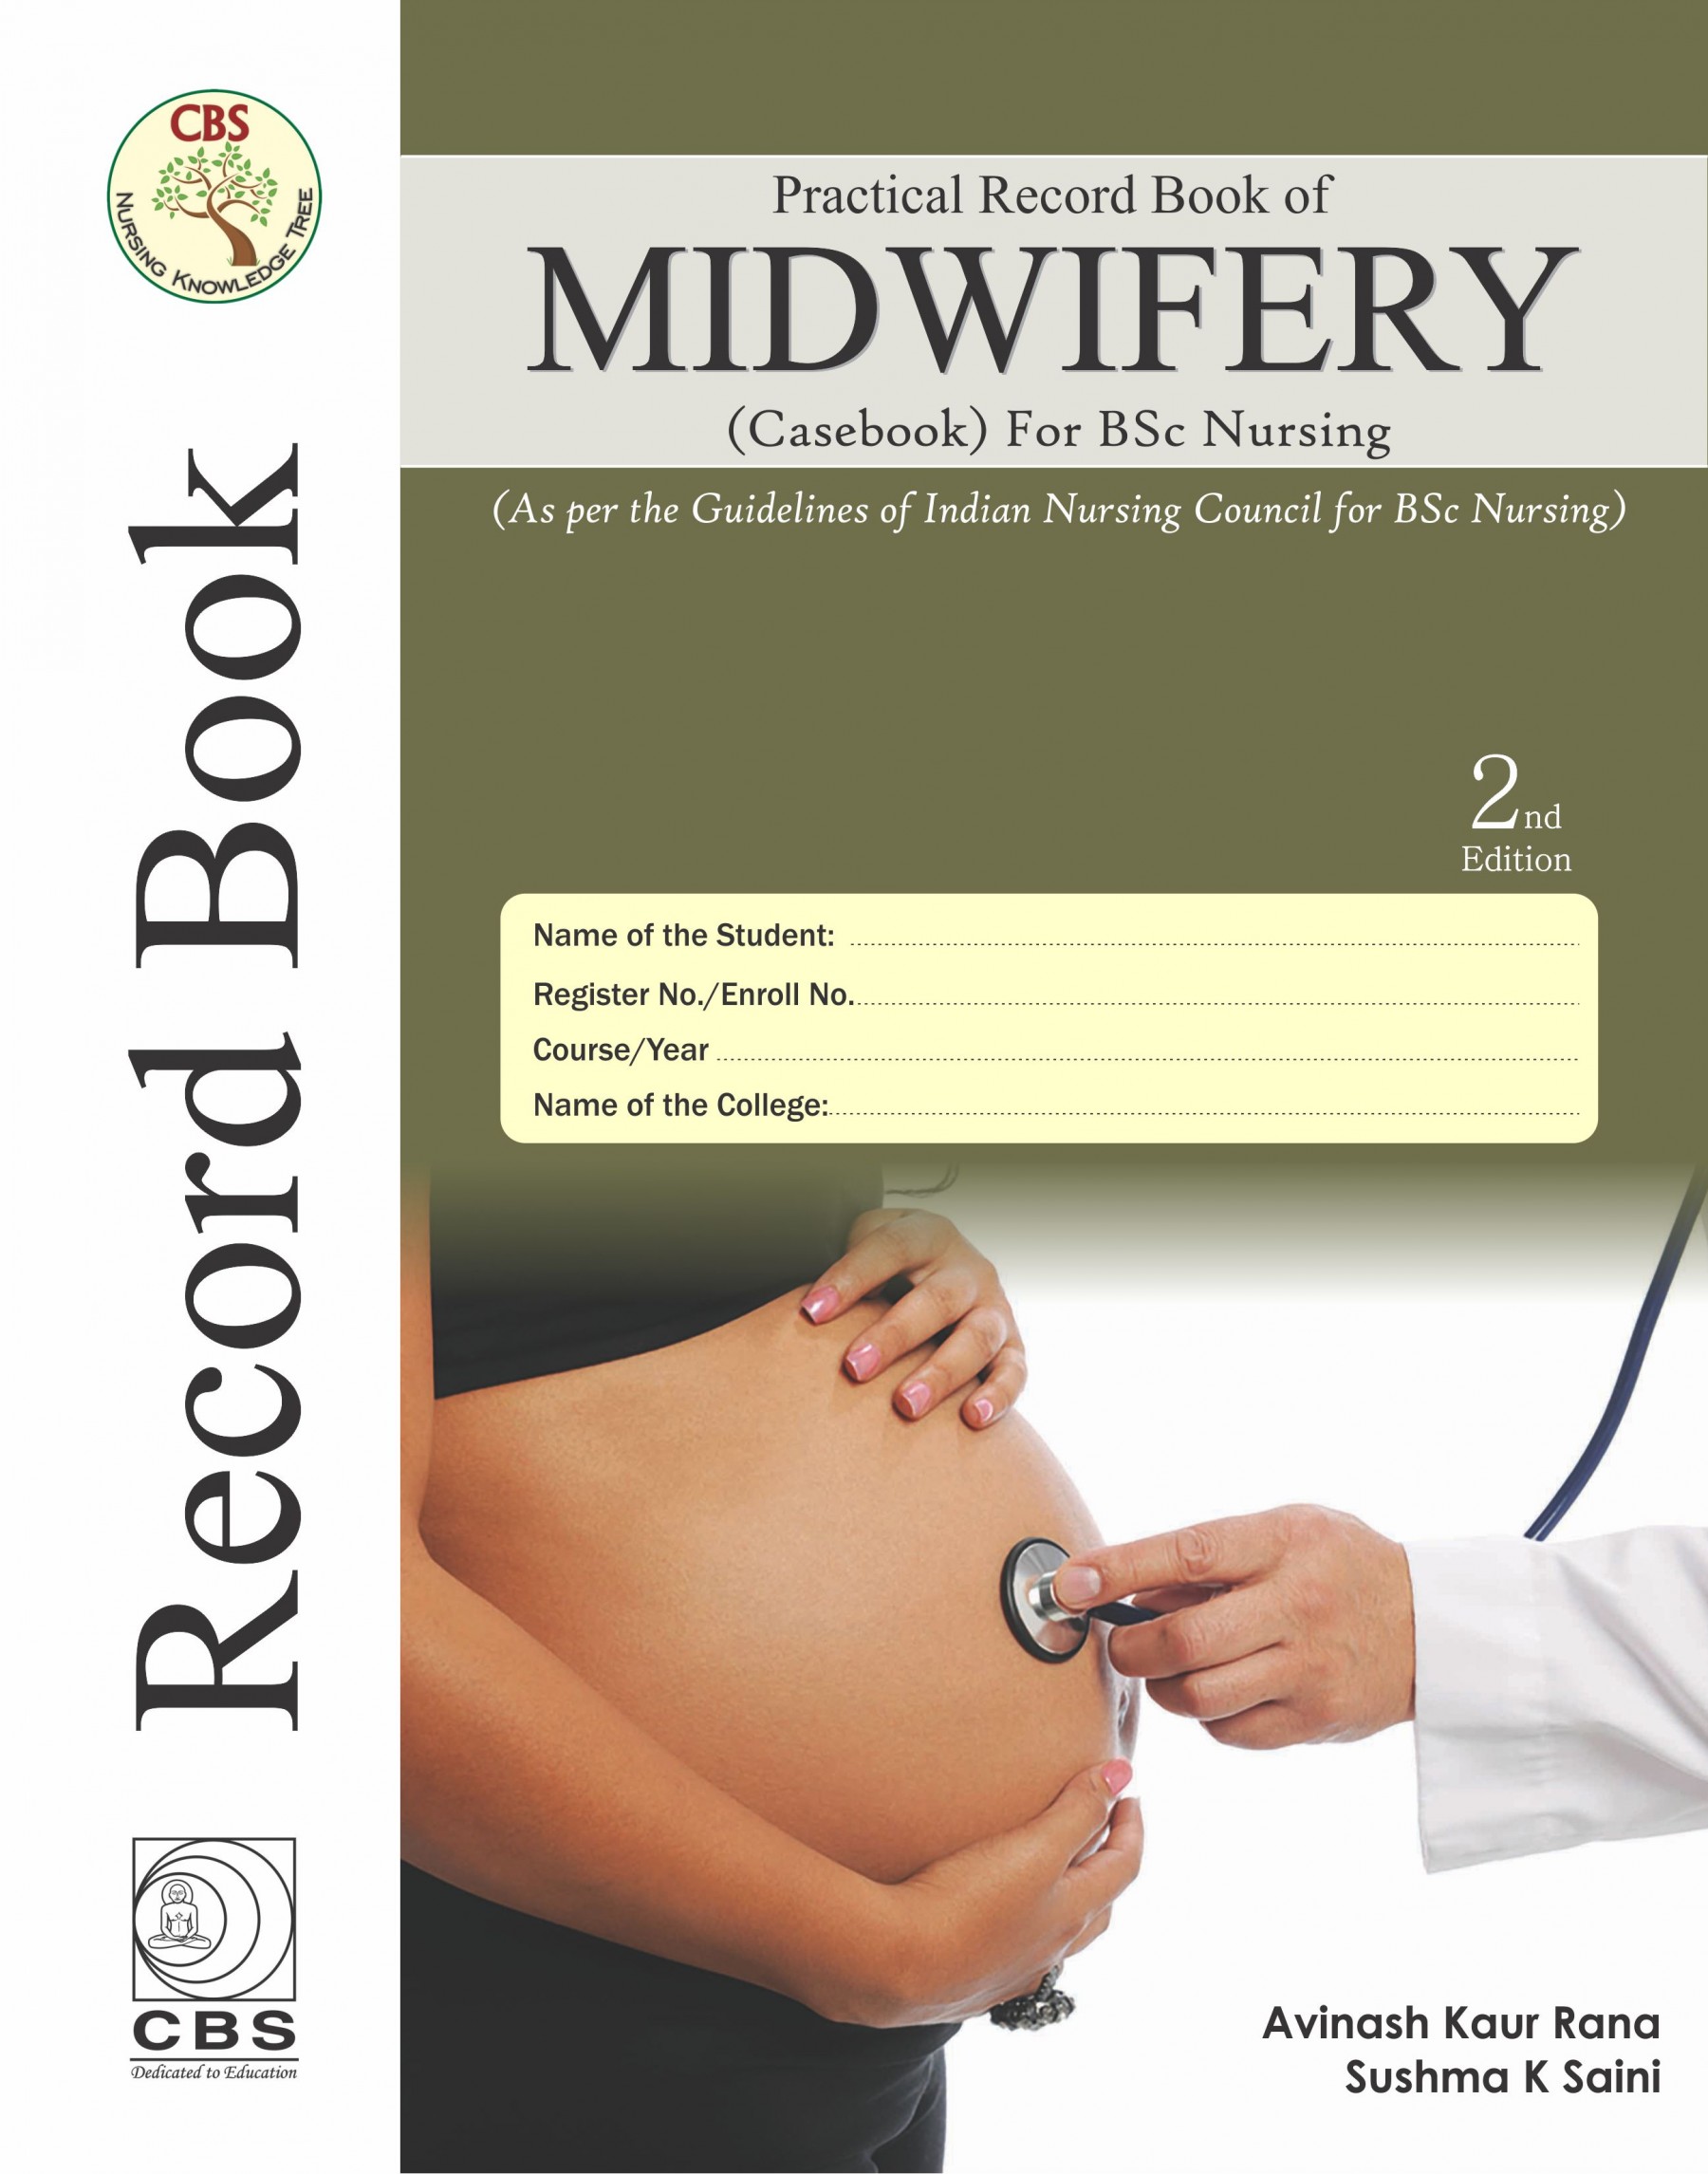 Practical Record Book of Midwifery (Casebook) for BSc Nursing